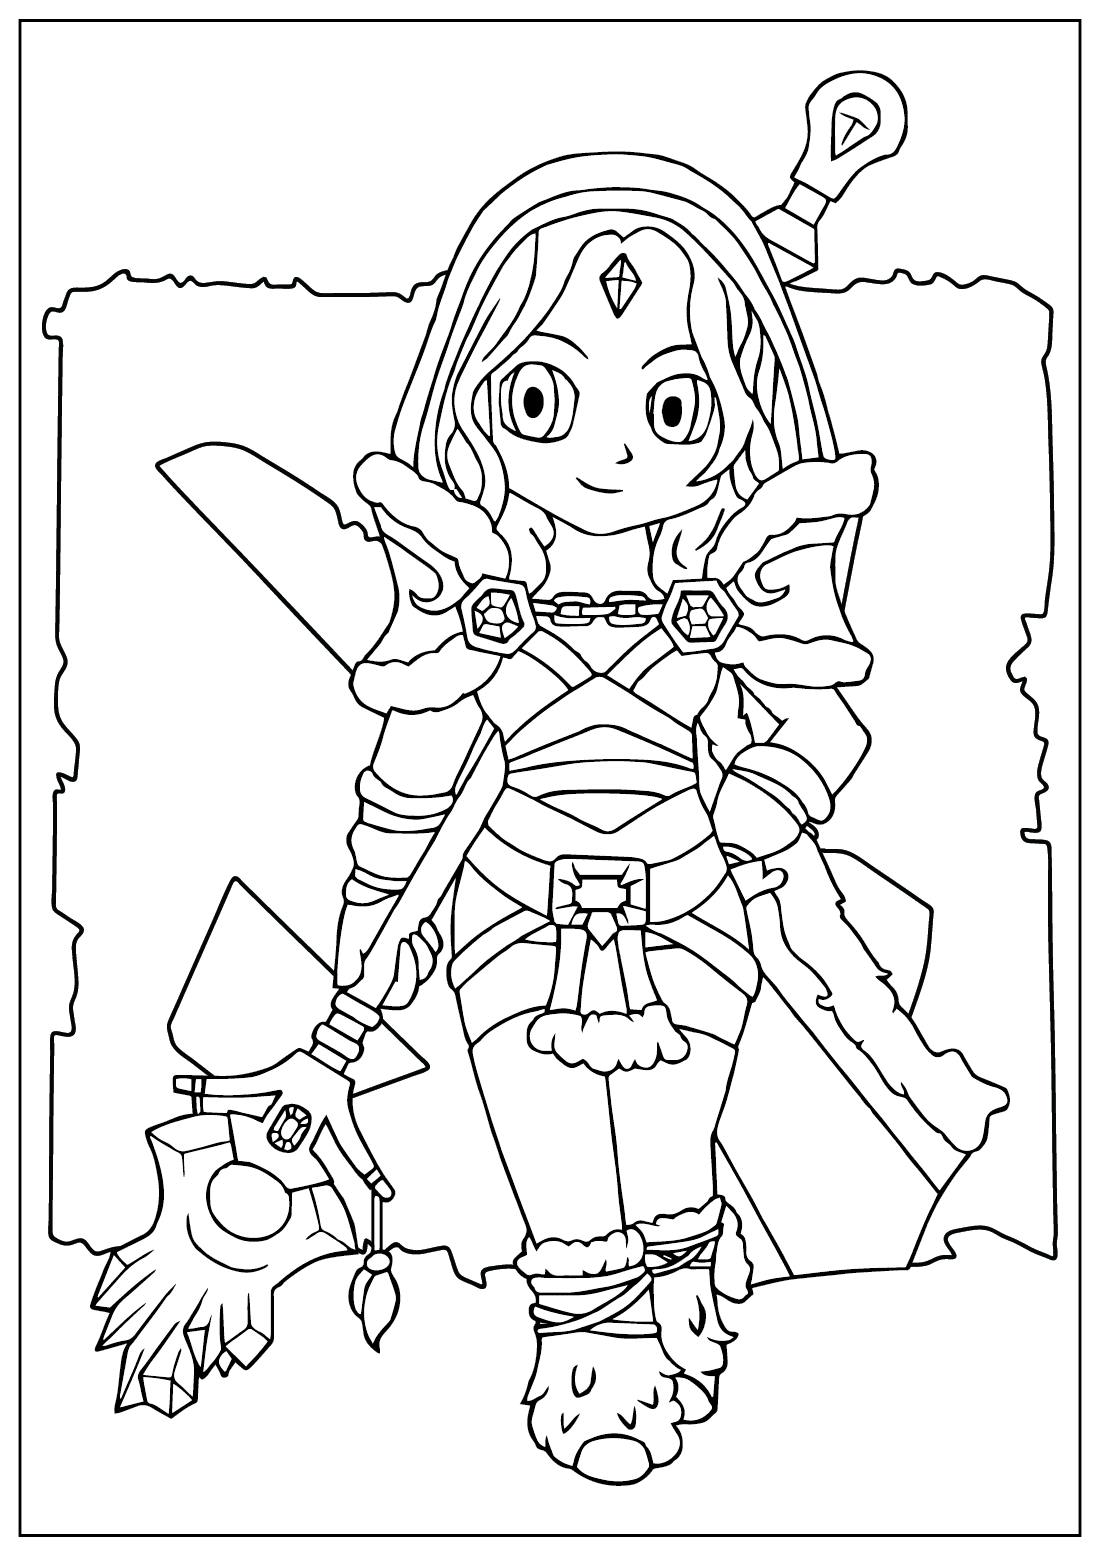 Dota 2 Crystal Maiden Coloring Page from Dota 2